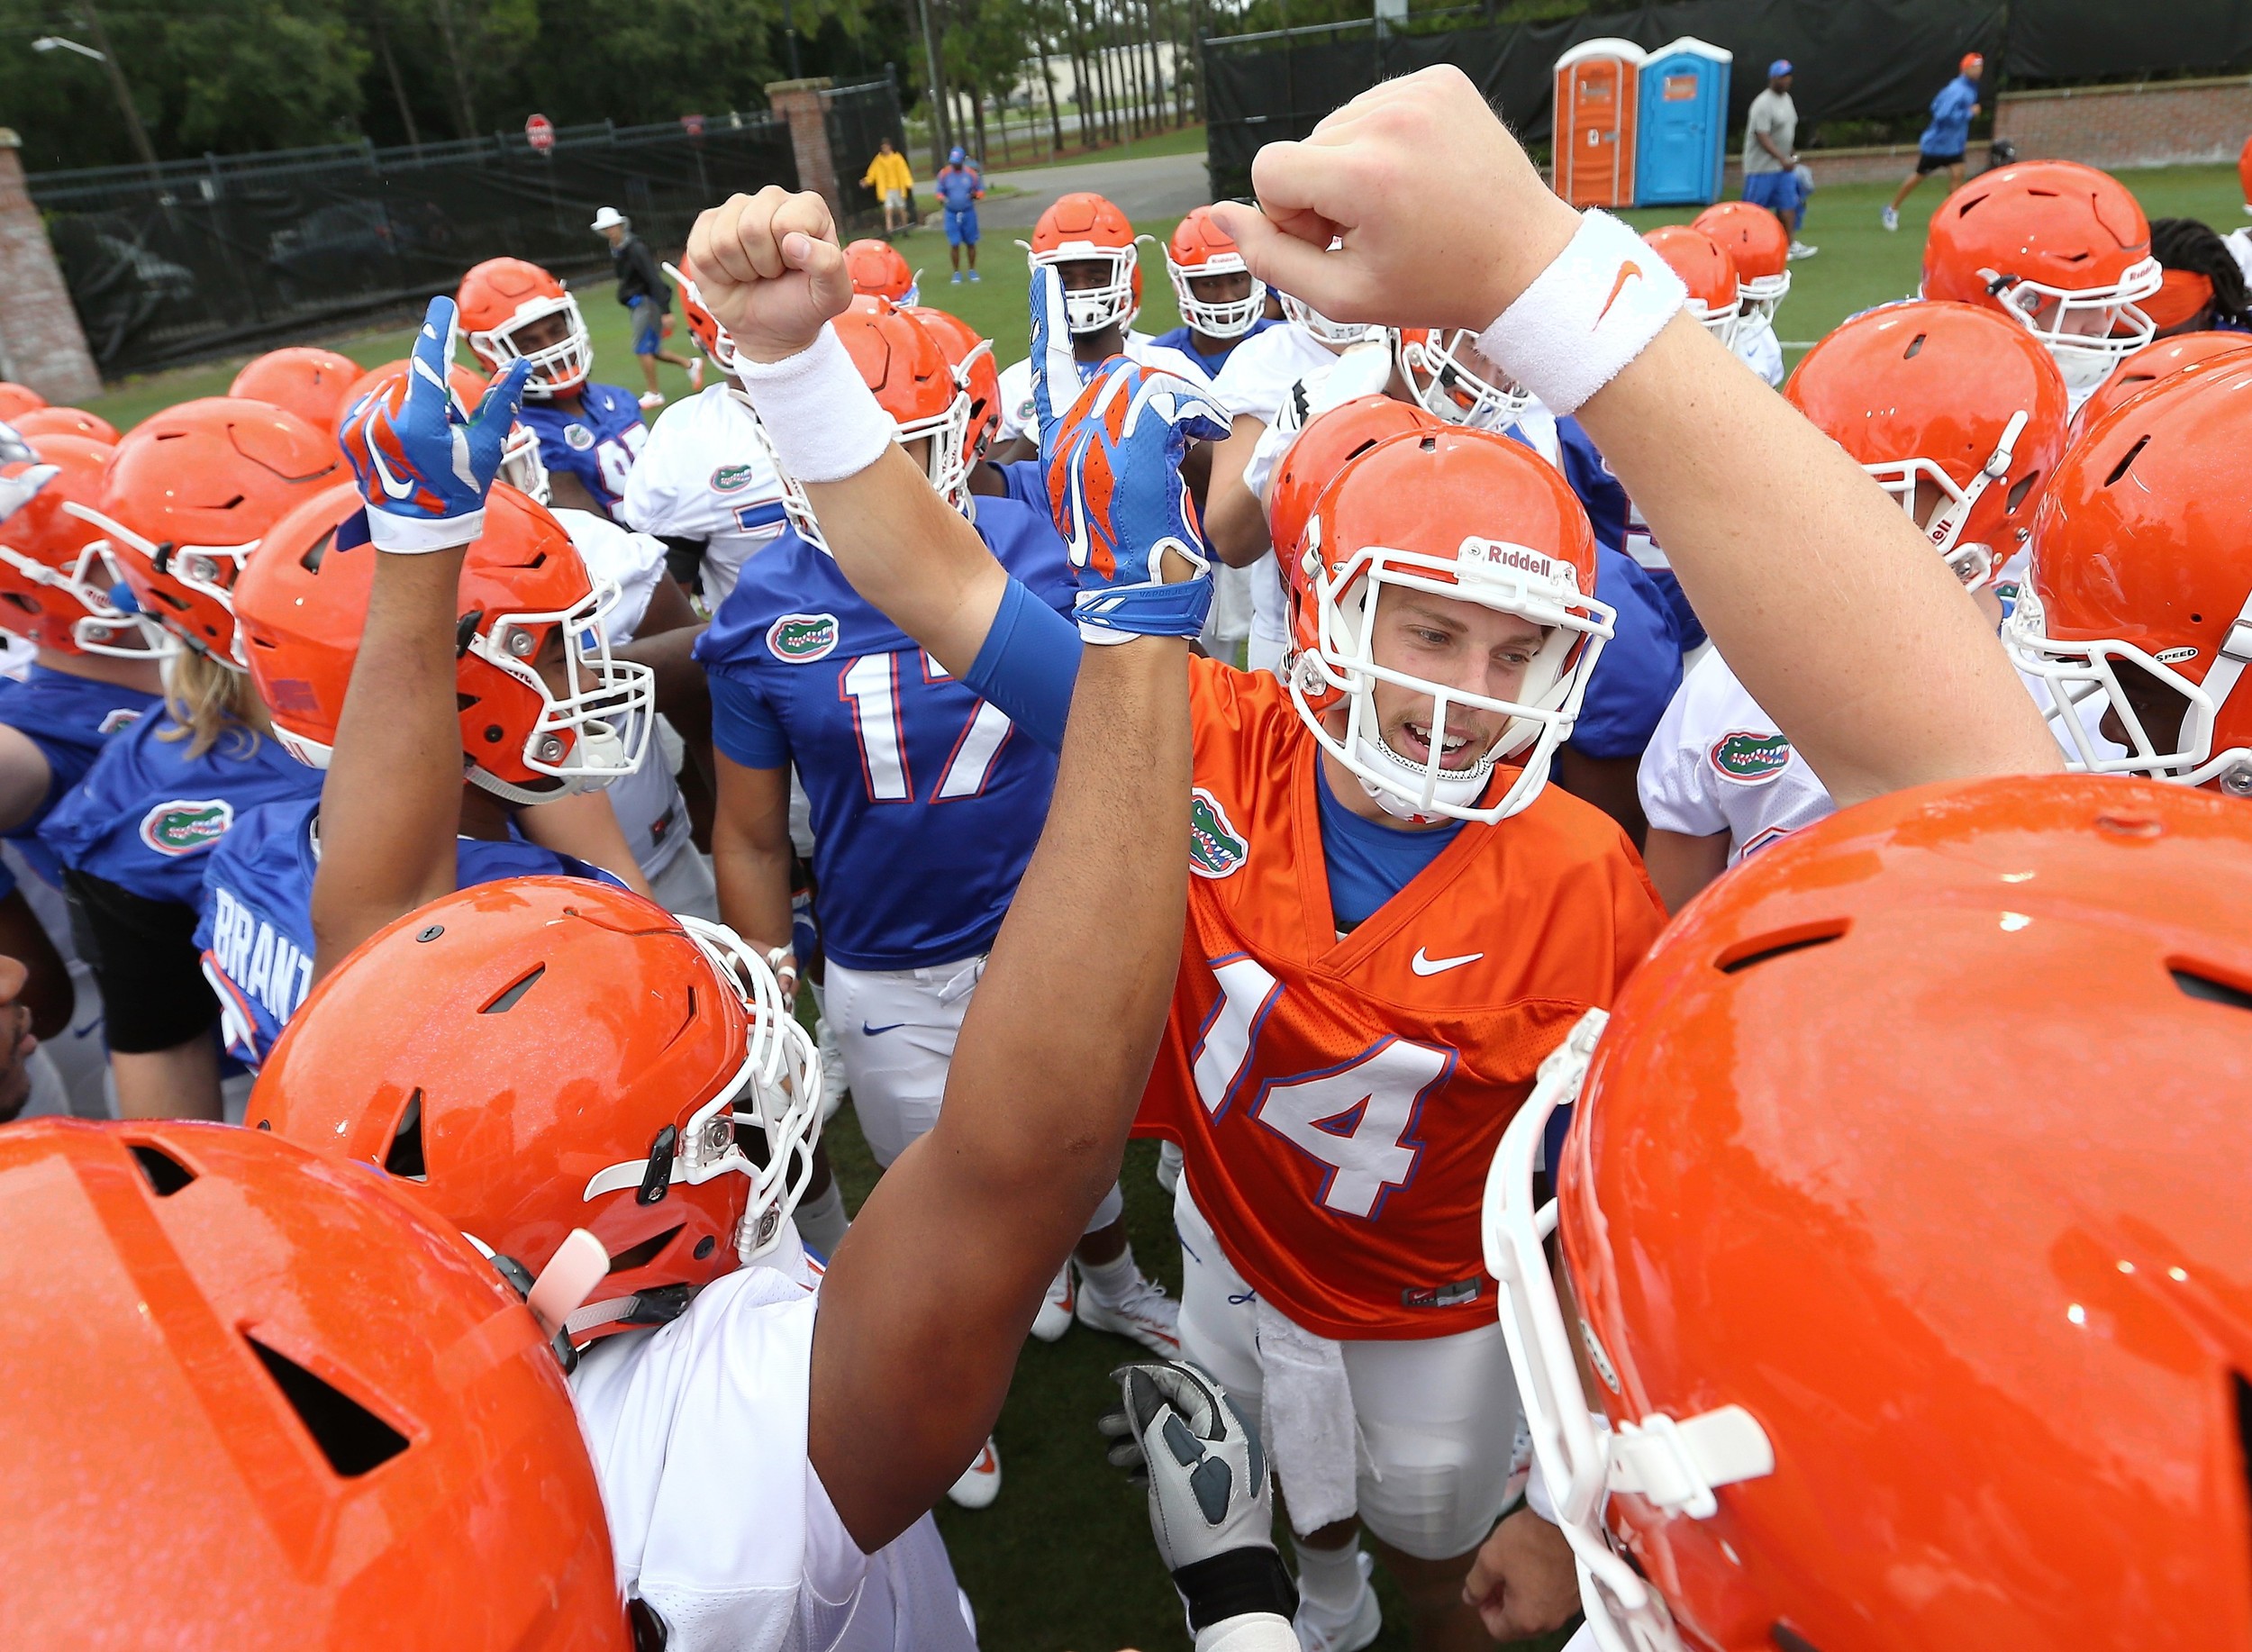 Florida QB Luke Del Rio, No. 14, leads the Gators at practice and looks like their starter on Sept. 10. (Photo by Tim Casey)